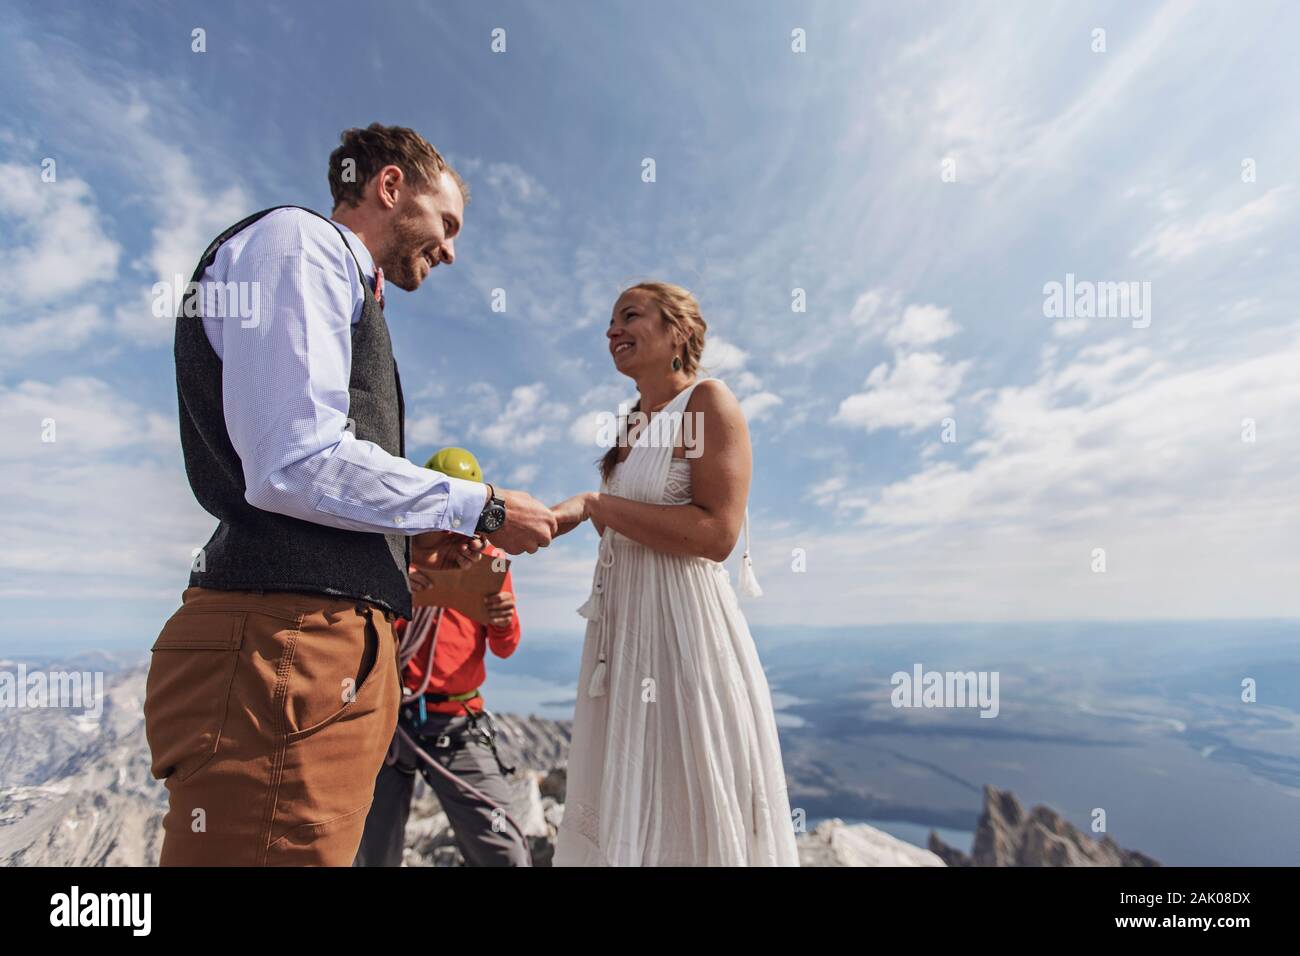 Couple exchanges vows and rings during wedding on top of mountain Stock Photo